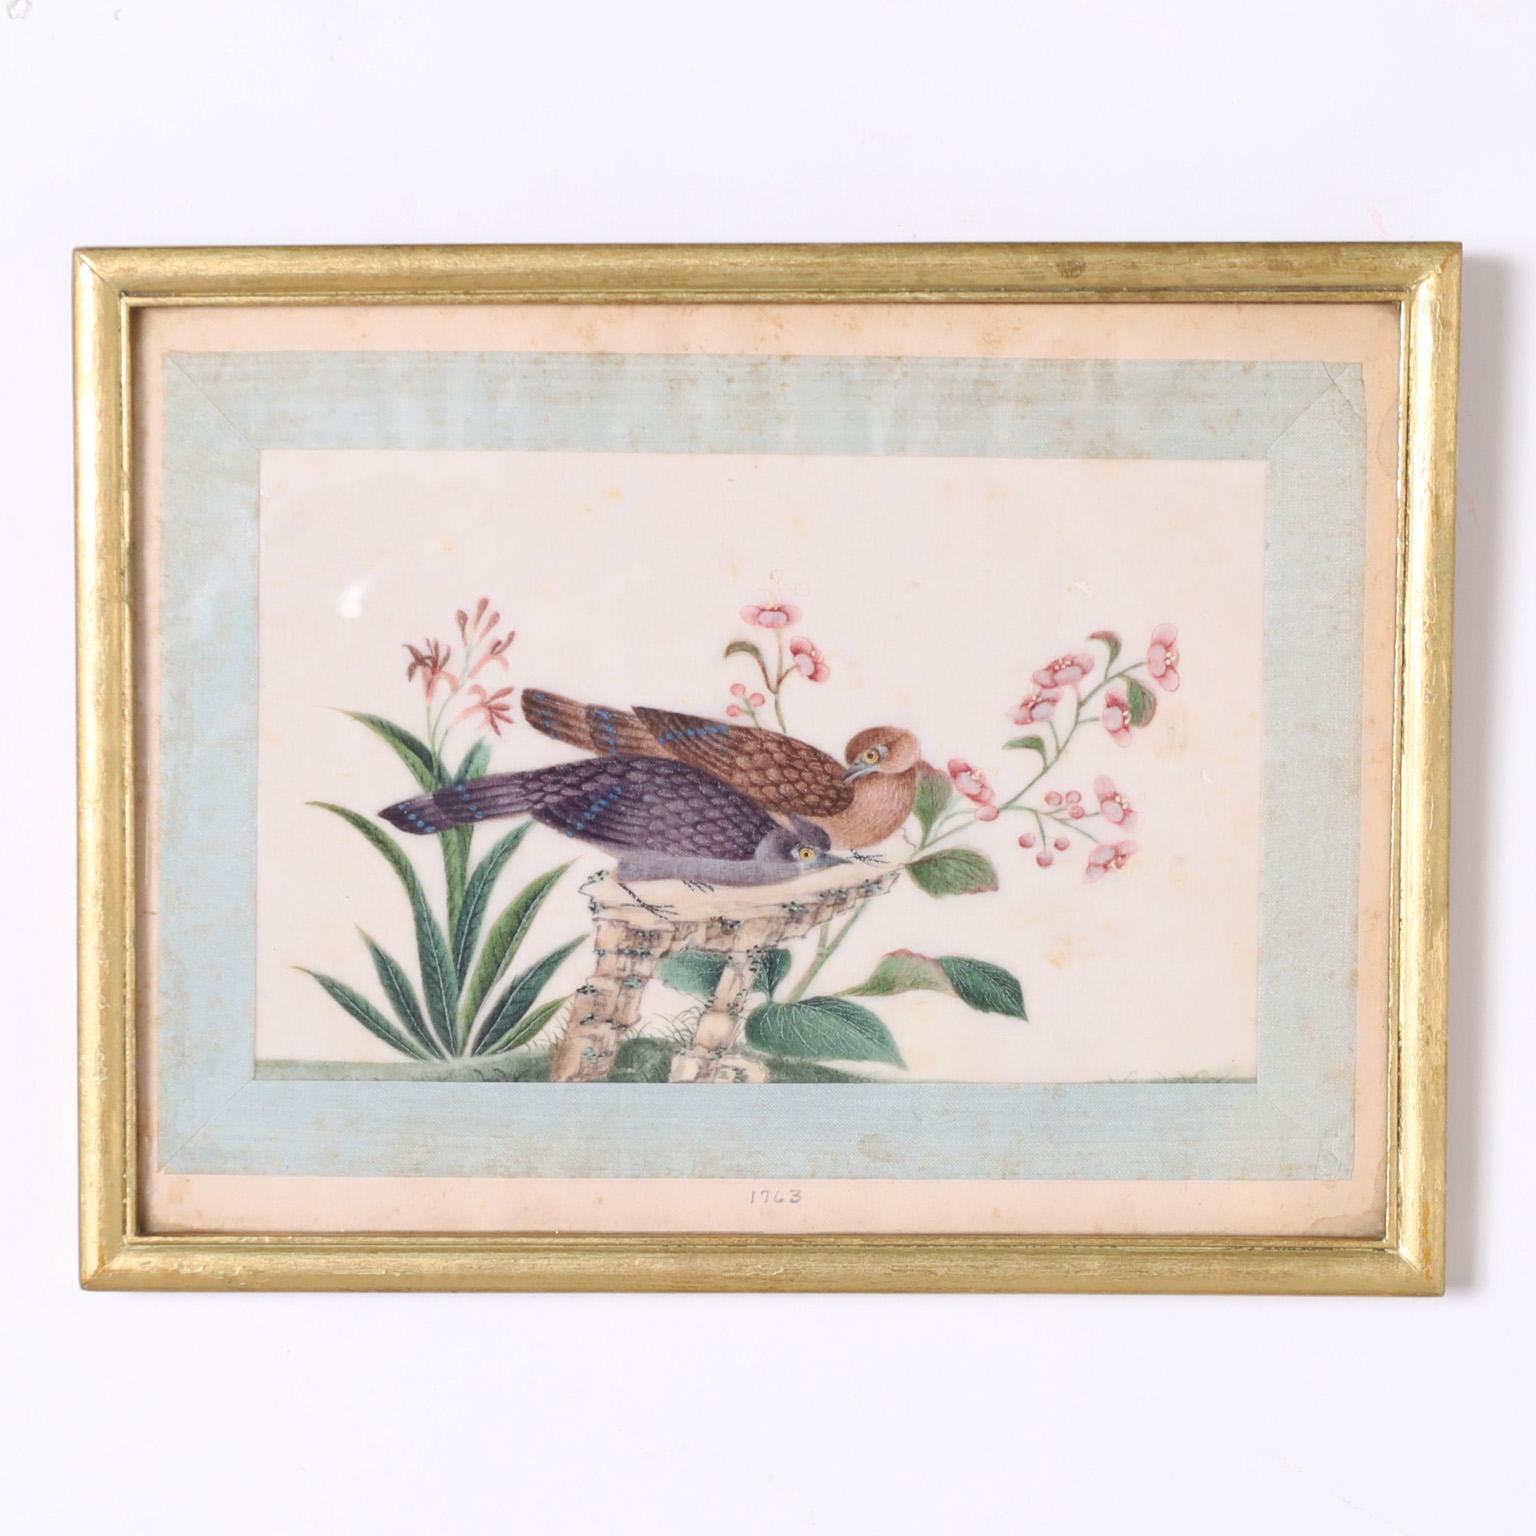 Rare and remarkable set of eight 18th century paintings of birds on silk executed with egg tempera in a delicate yet colorful style. Interesting historical footnote on the back of one. Presented under glass in a gilt wood frame.